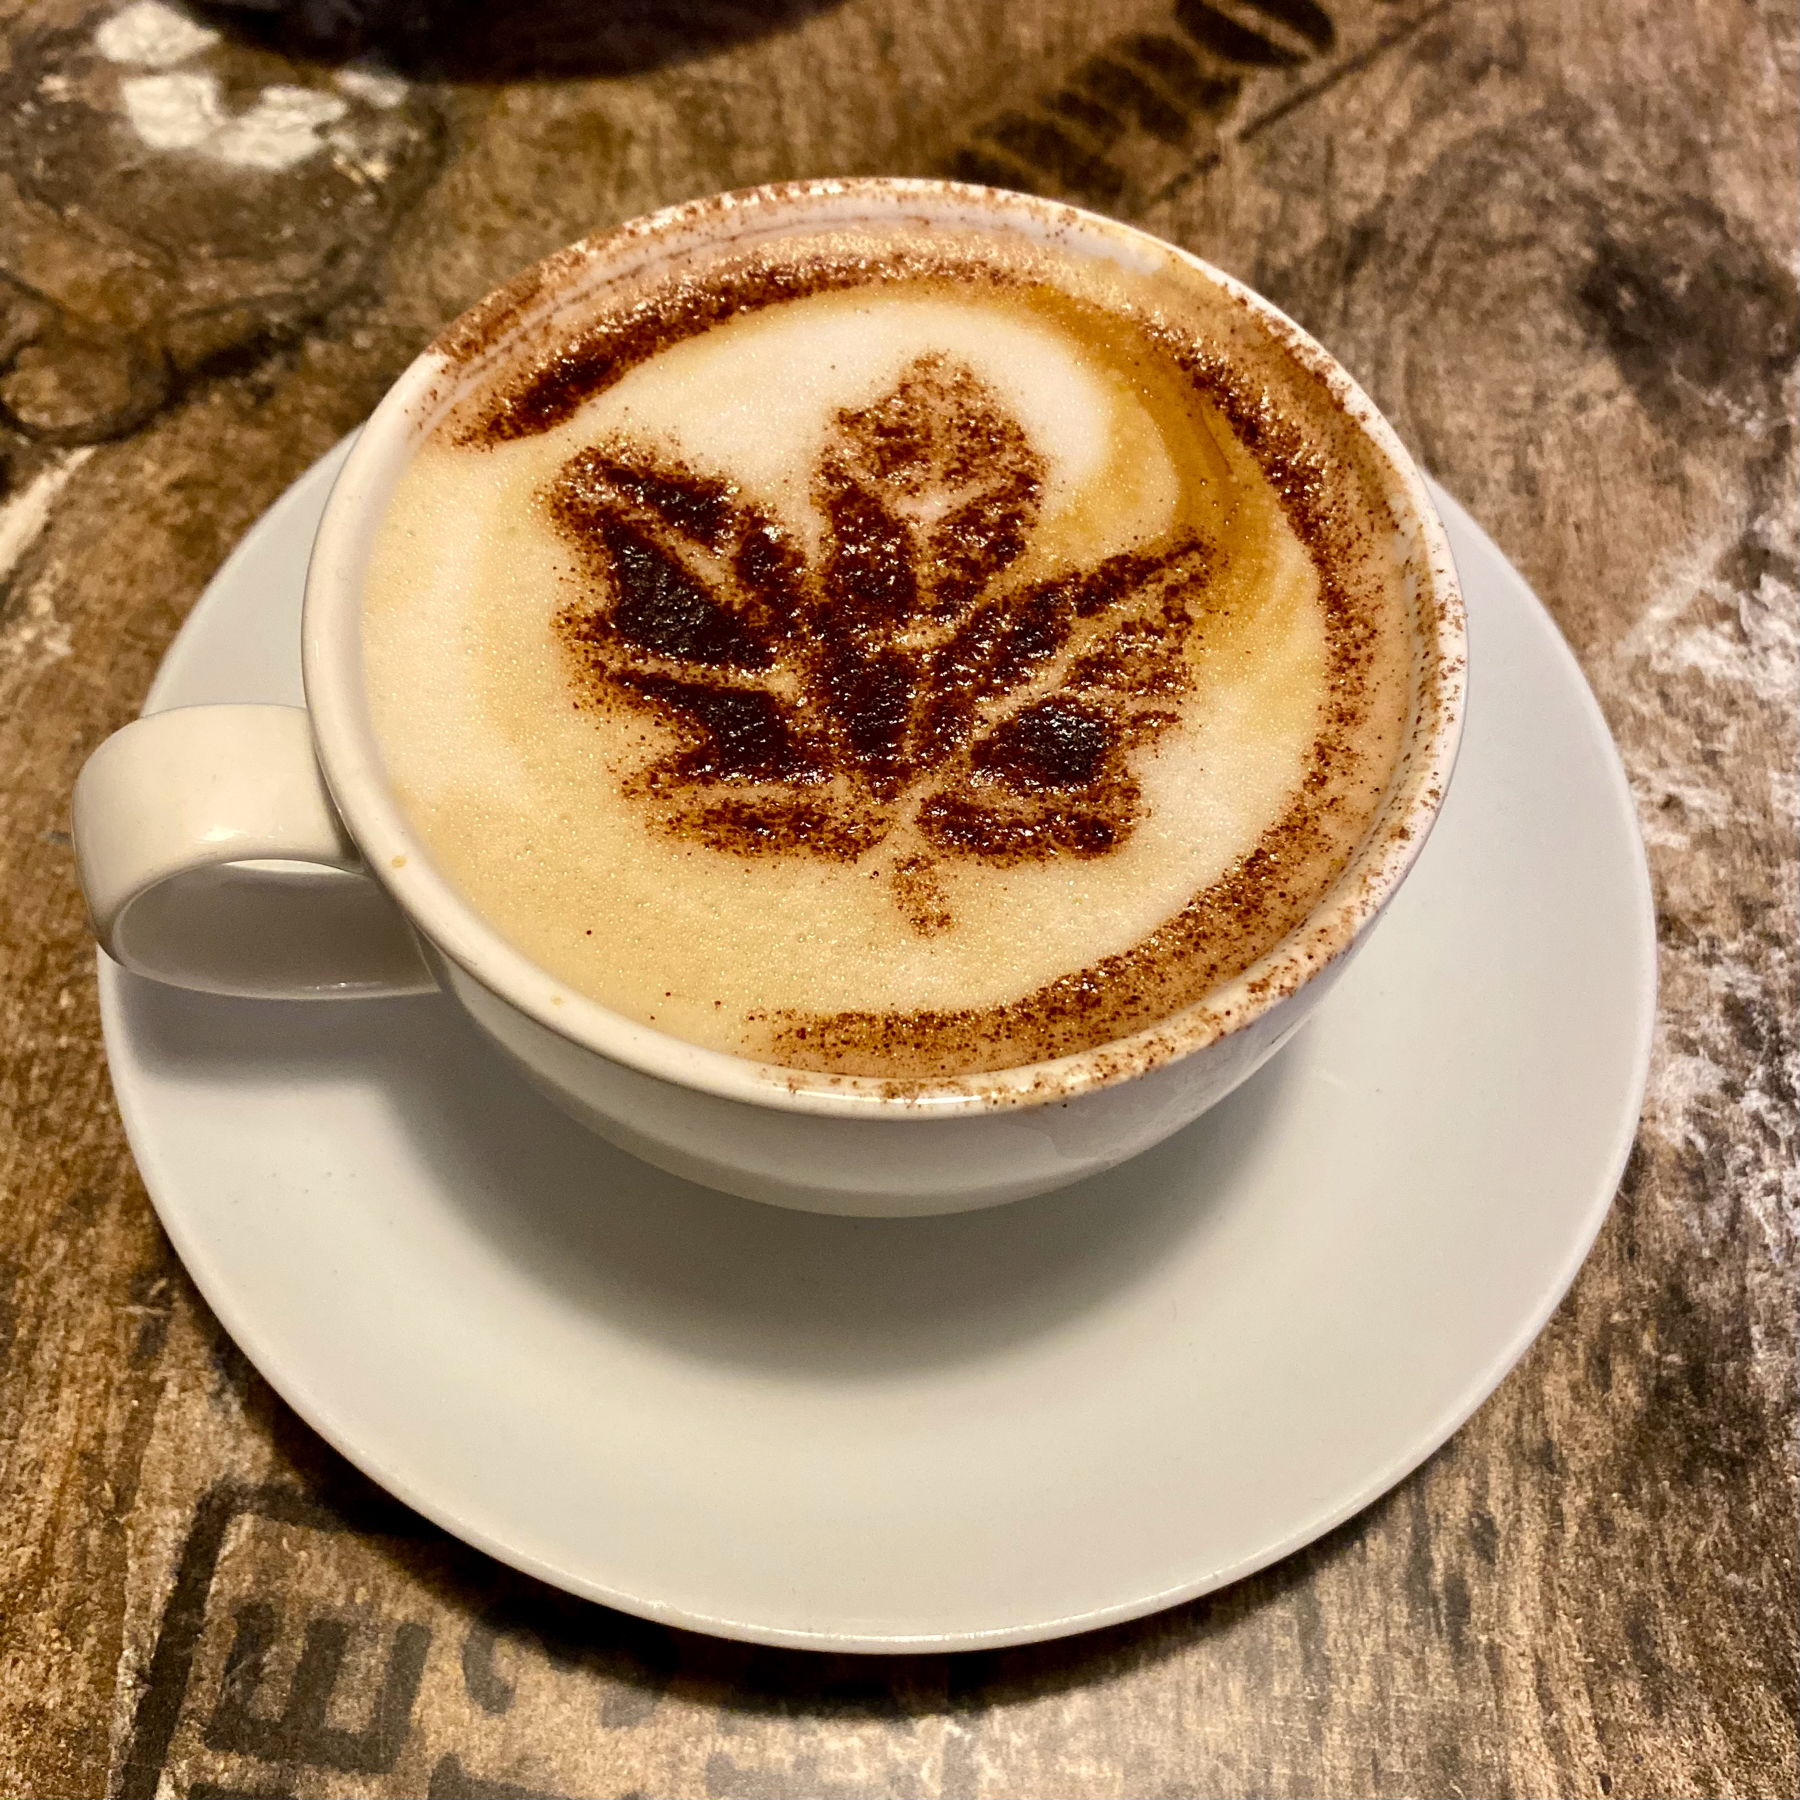 Large cup of cappuccino with chocolate powder leaf pattern dusted on the surface of the foam